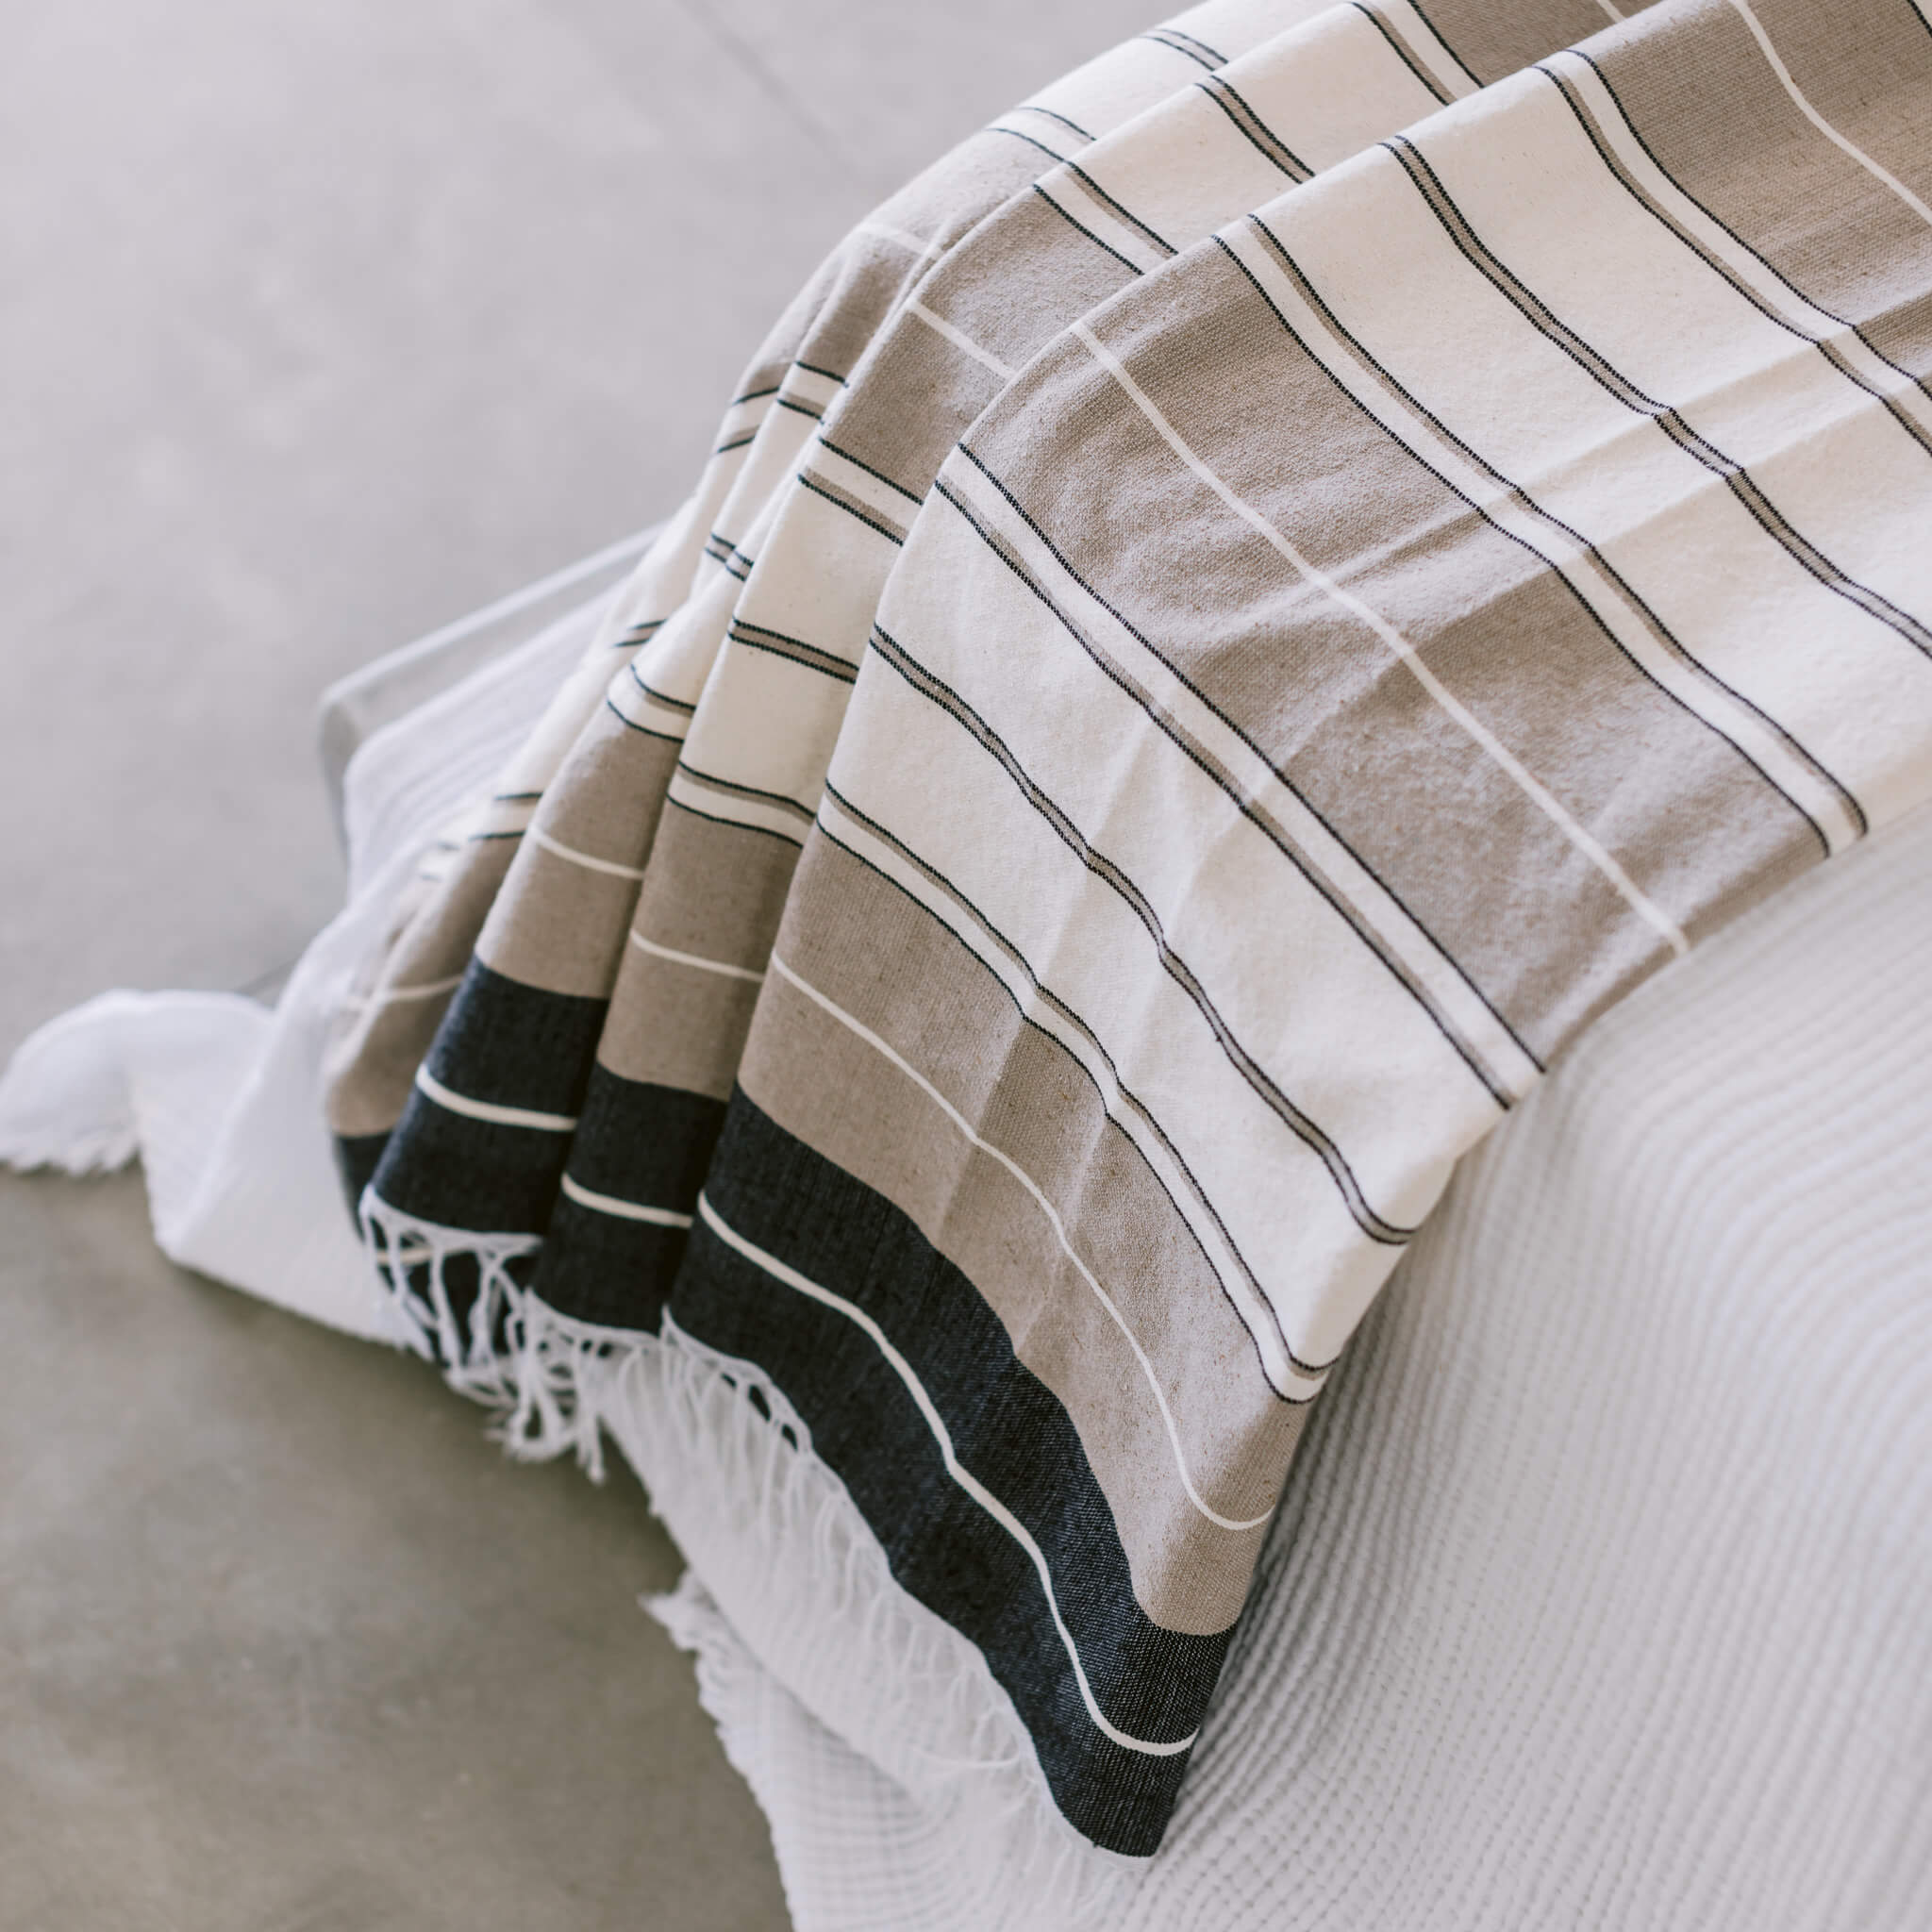 The details on a desert stripes cotton coverlet on the edge of a bed.